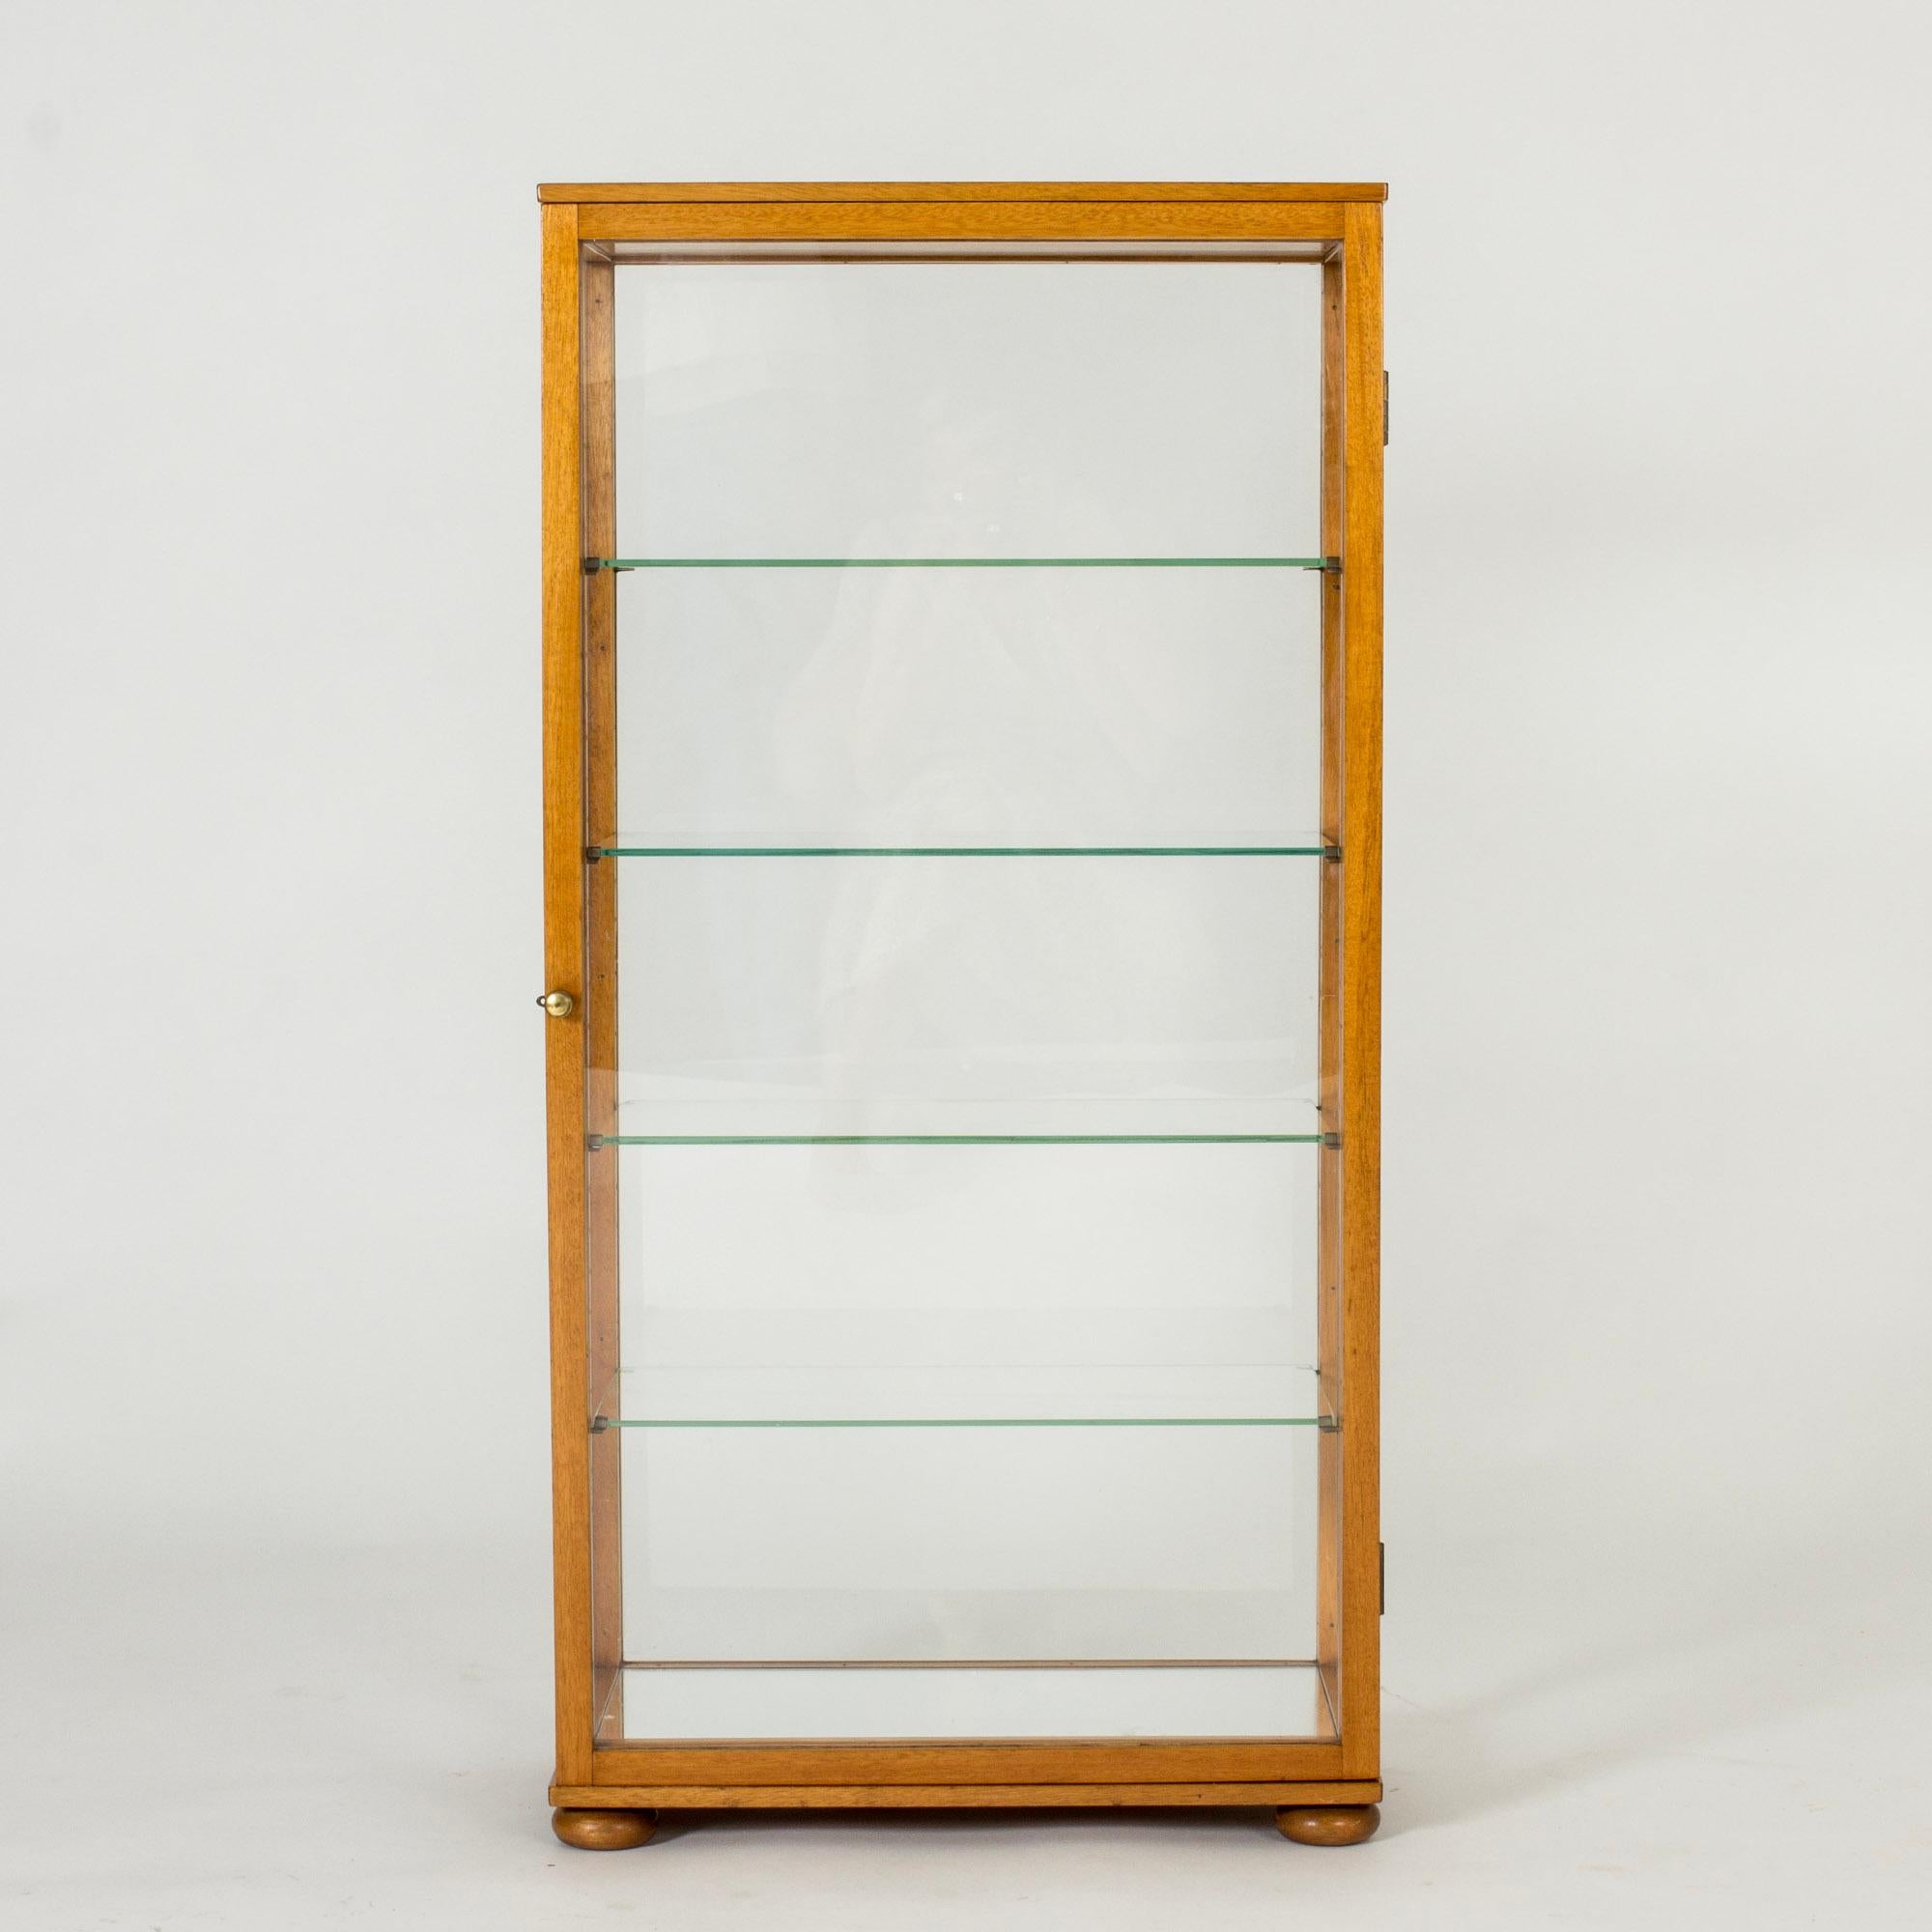 Beautiful table vitrine cabinet by Josef Frank, made from mahogany in a sleek design. Glass shelves and mirror bottom let the light flow freely. Perfect for displaying cherished objects.